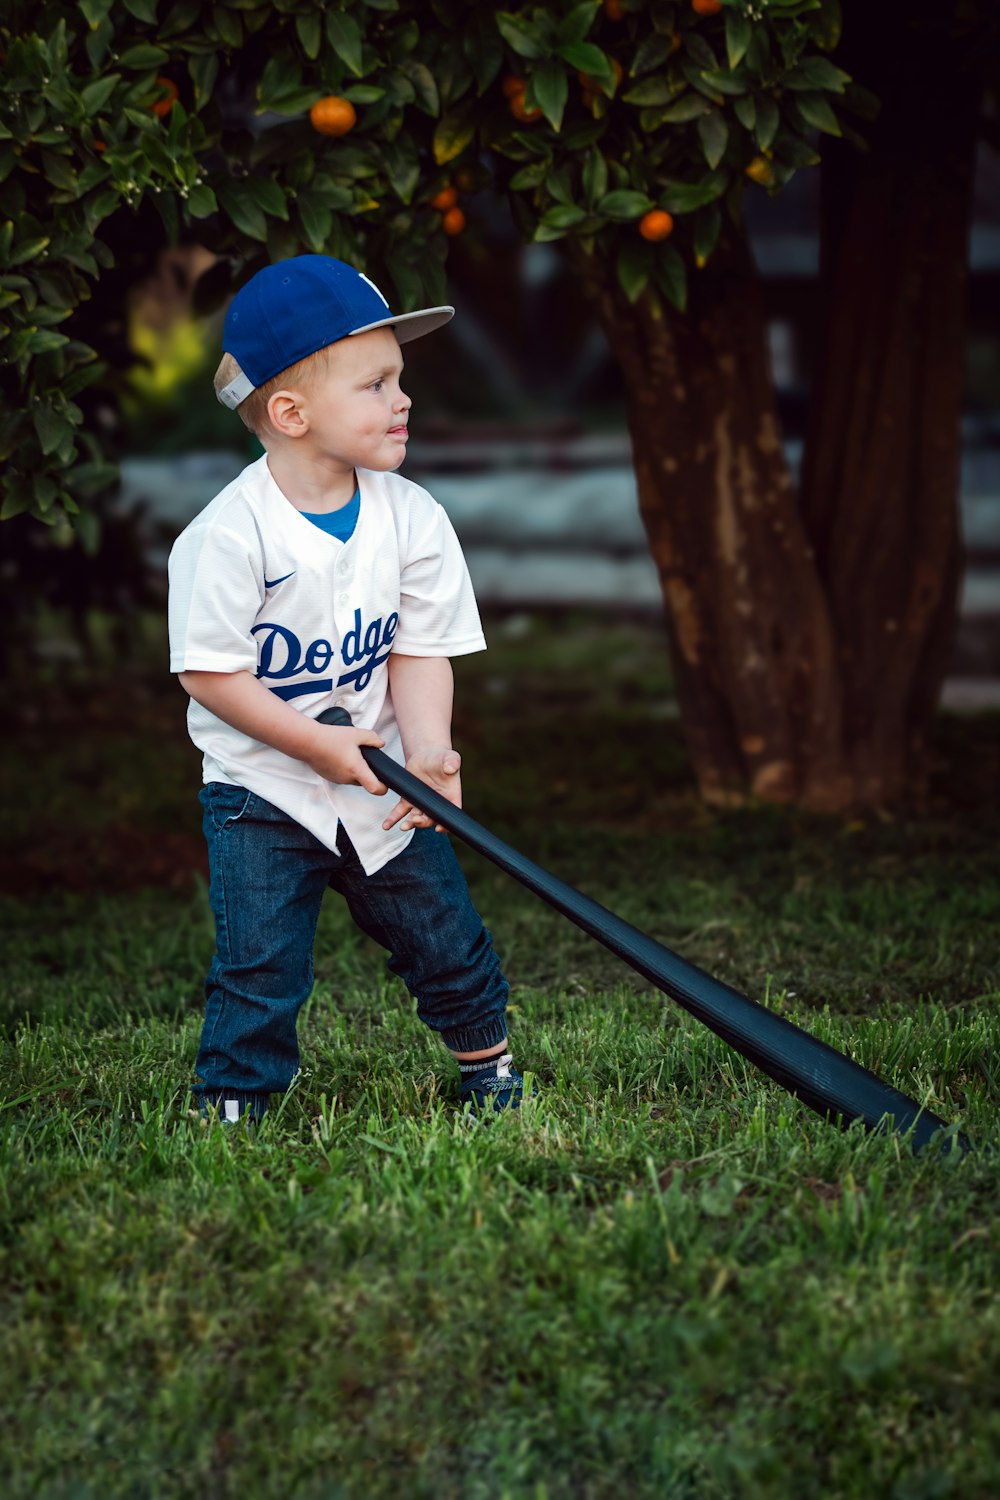 a young boy holding a baseball bat in a field